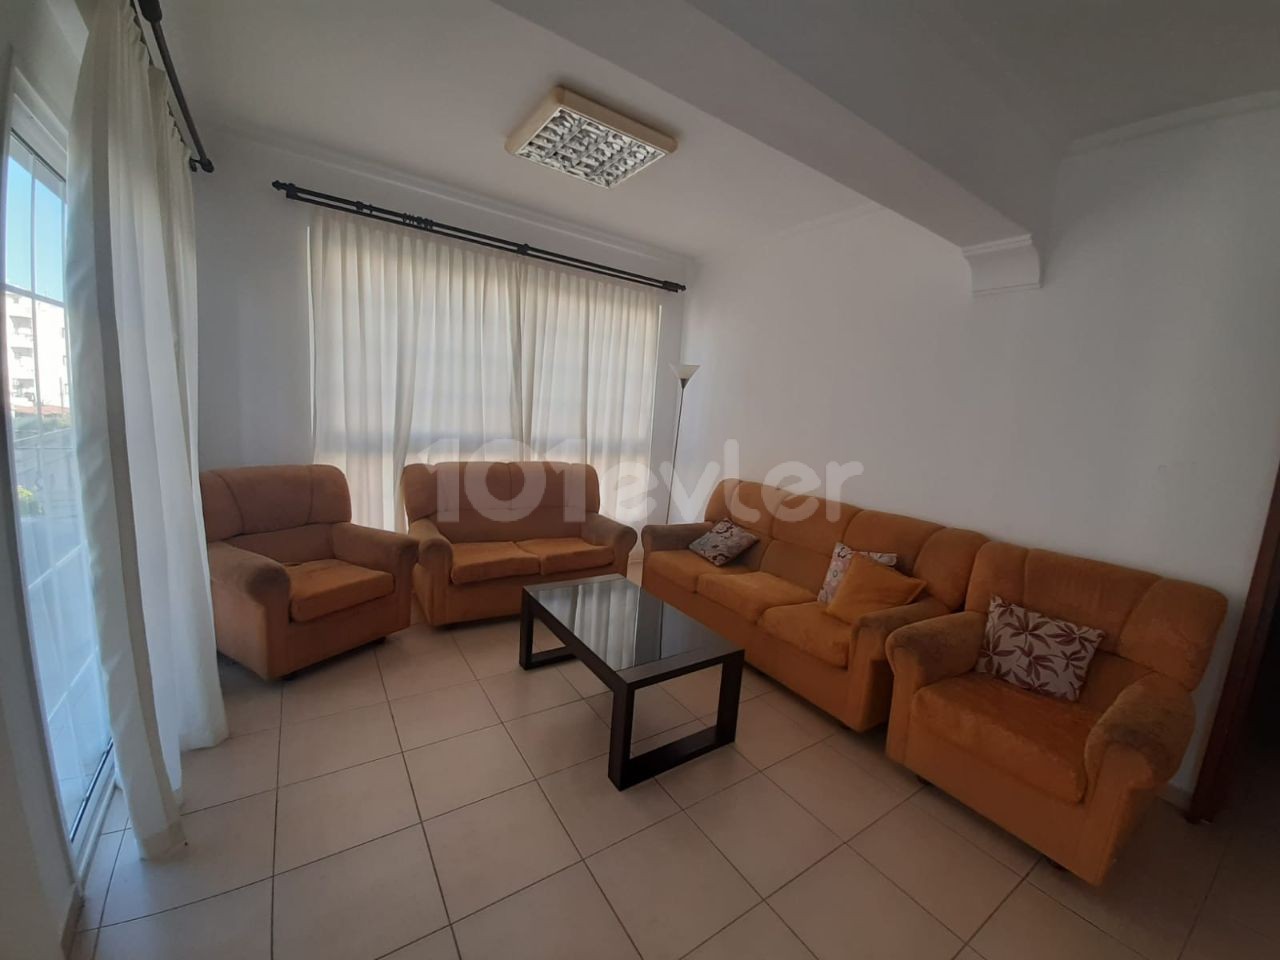 ▪️Magusa for rent 3+1 apartment ▪️Asansor with 2 air conditioners ▪️Kirasi from 400$ payable 1 year in advance.  ▪️Aile will be a student.  ▪️Tv will come and 2 toilets will be renovated.  For rent as ▪️esyali.  